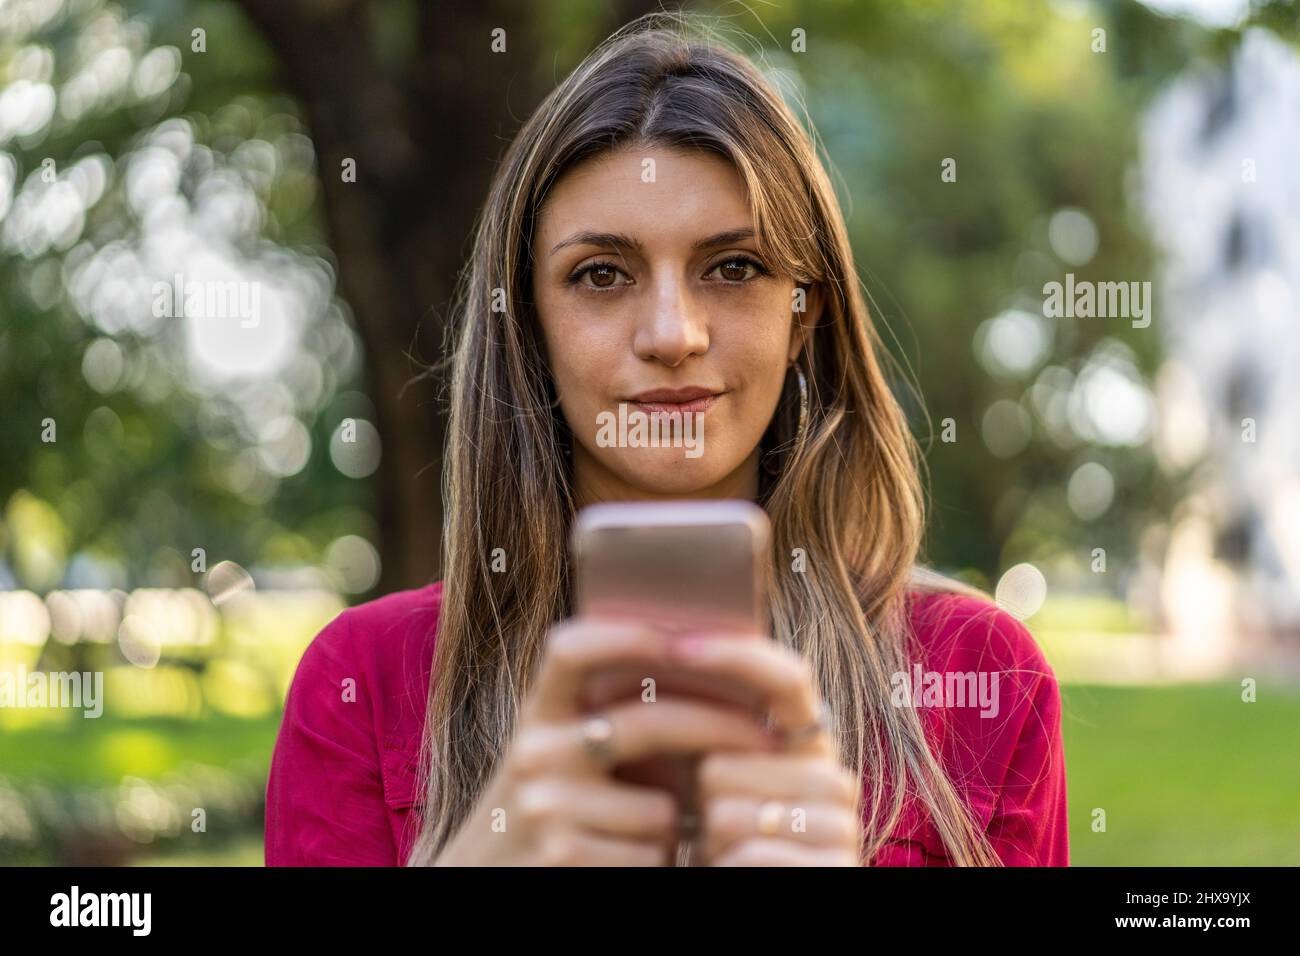 A woman using her smartphone outdoors. She is looking at the camera. Stock Photo